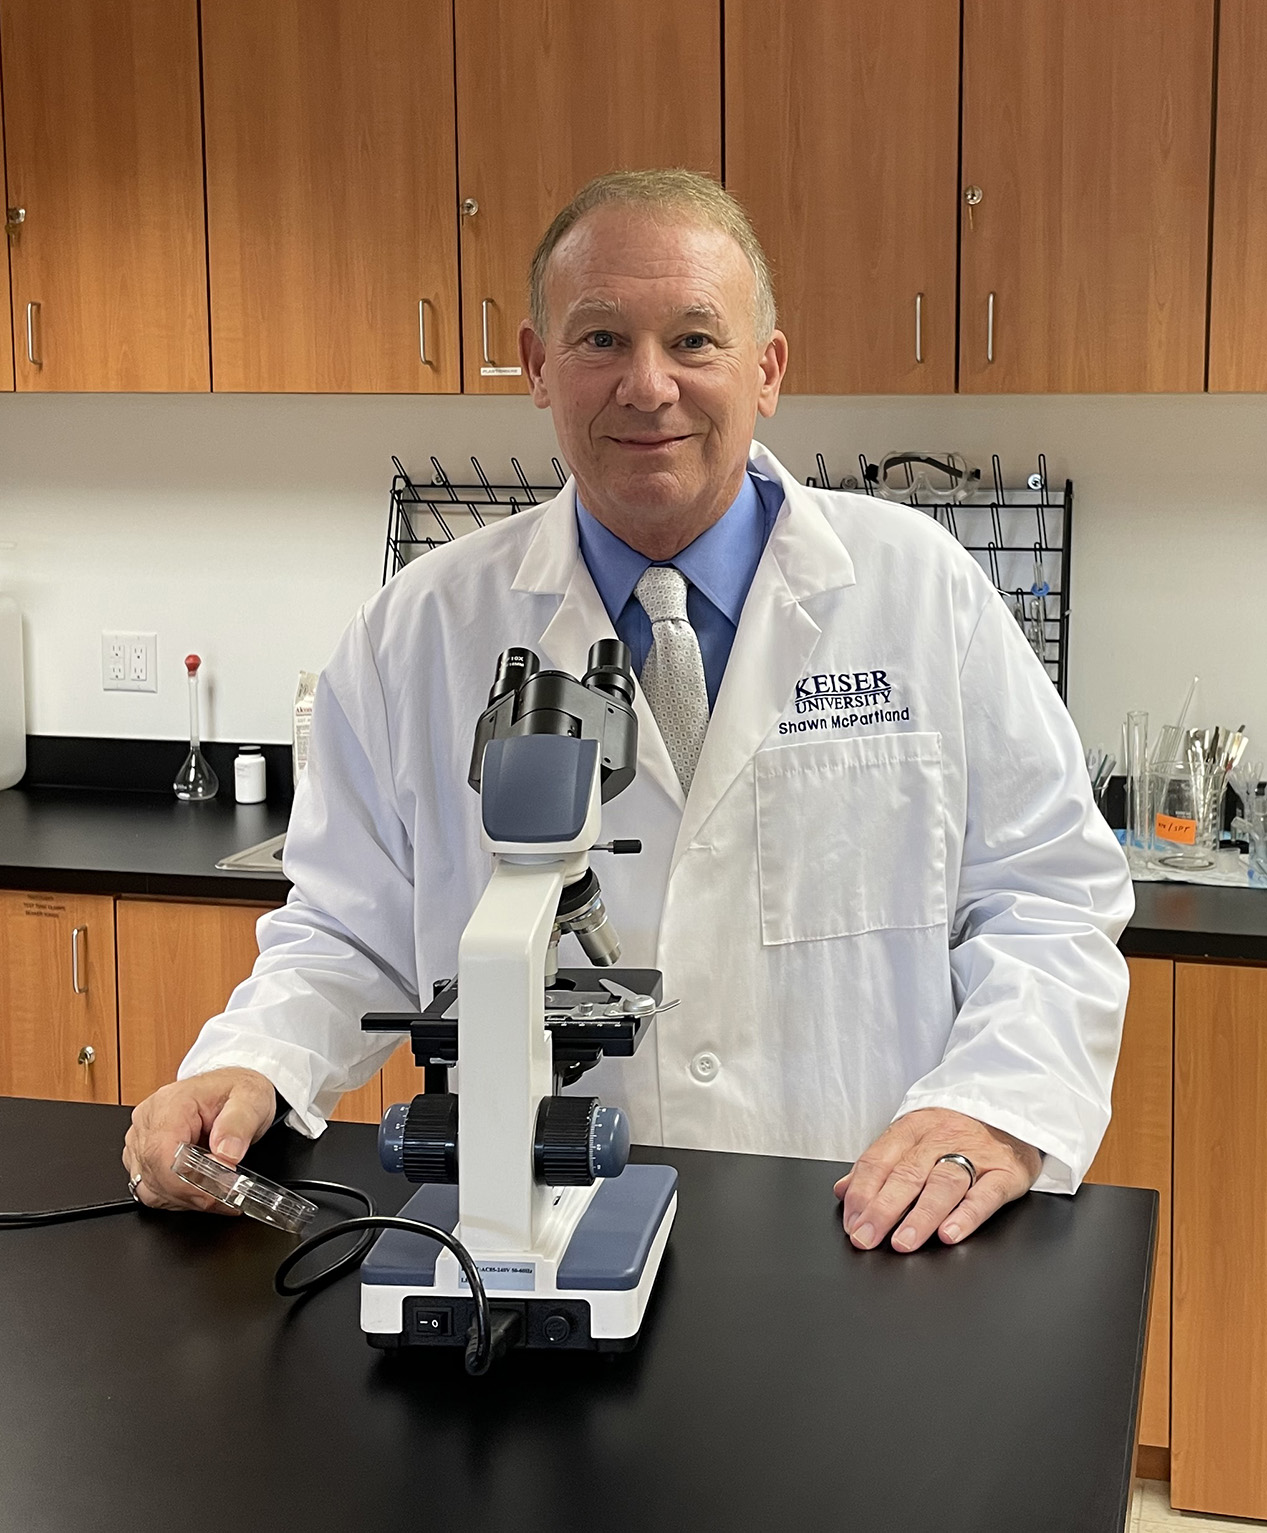 Keiser University Biomedical Science Learners to Enjoy Partnership with Tiny Earth